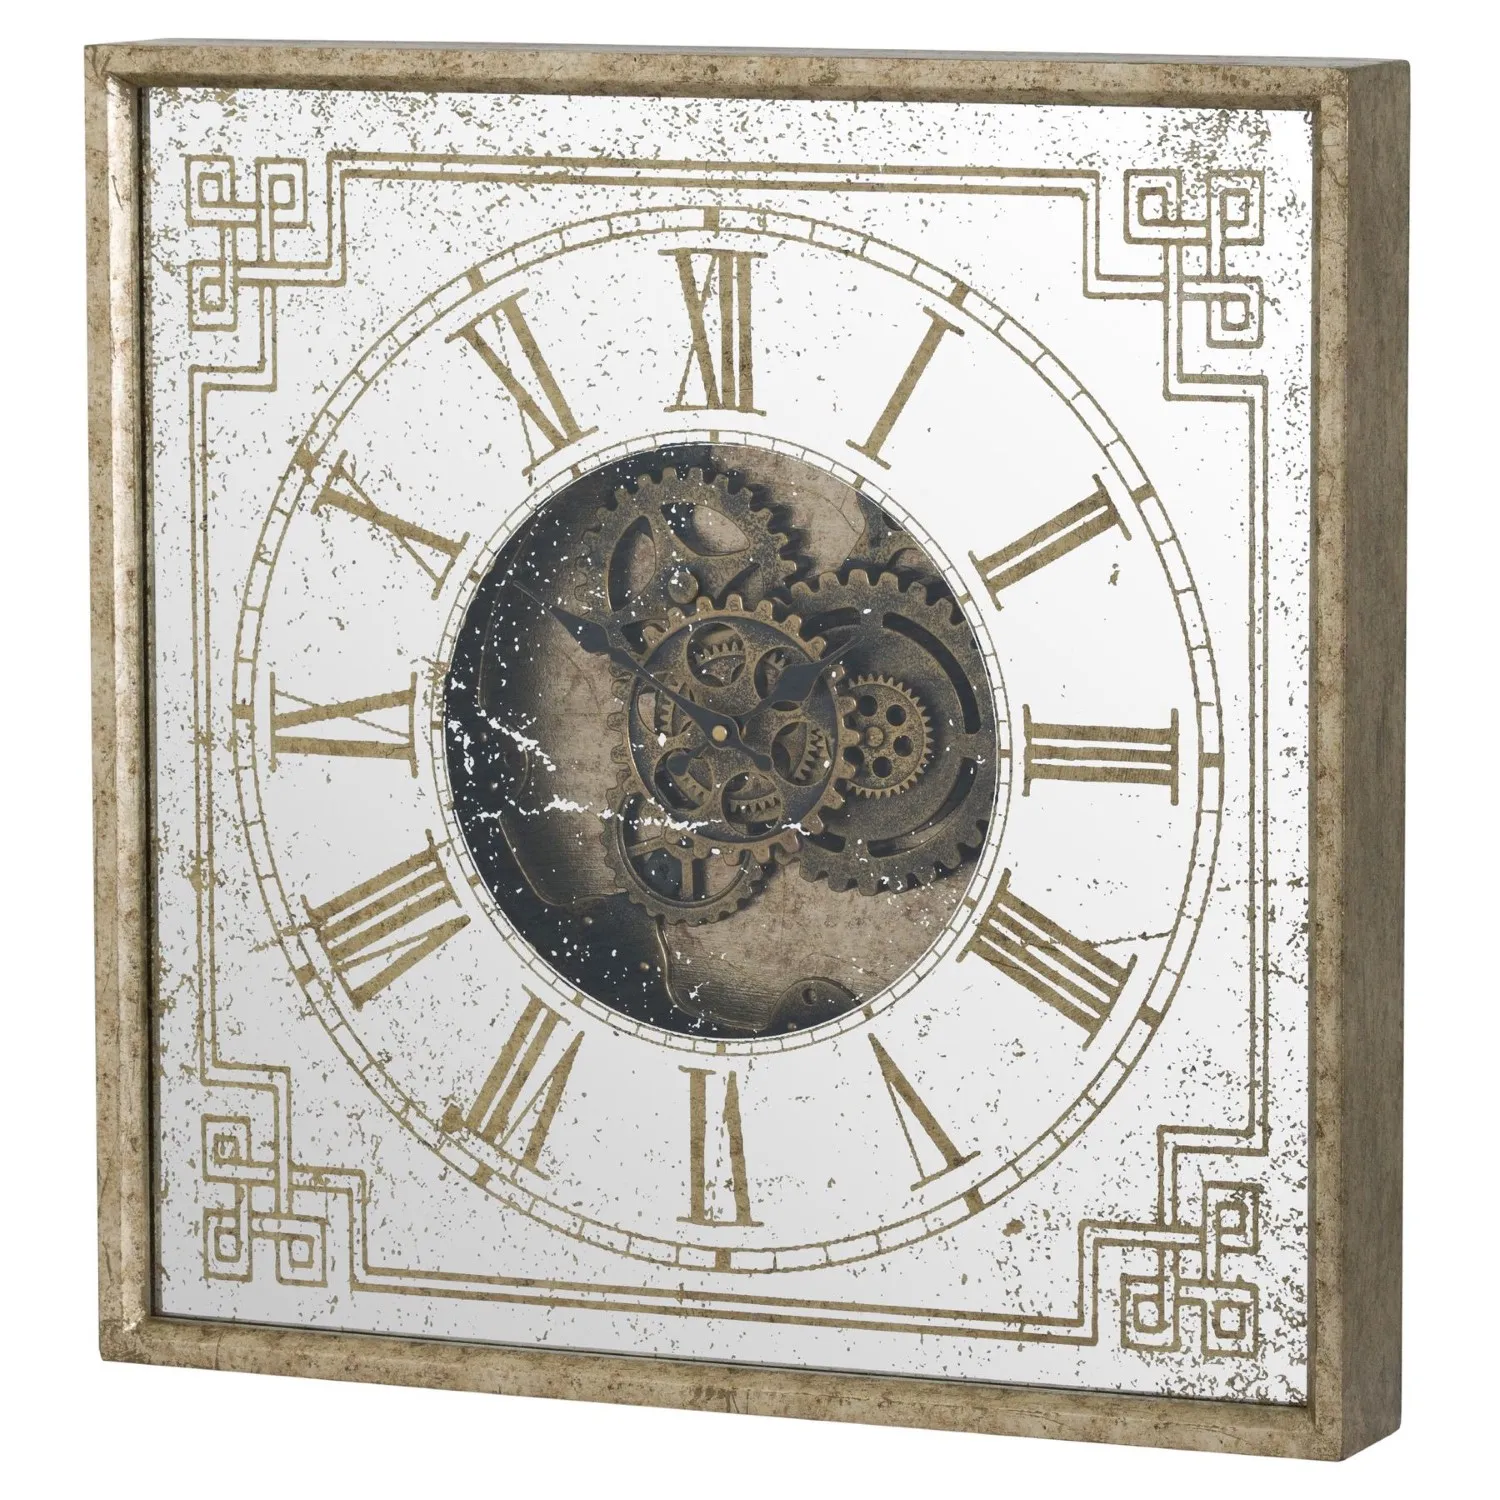 Retro Antique Gold Square Framed Wall Clock With Moving Gears Mechanism 60cm Diameter